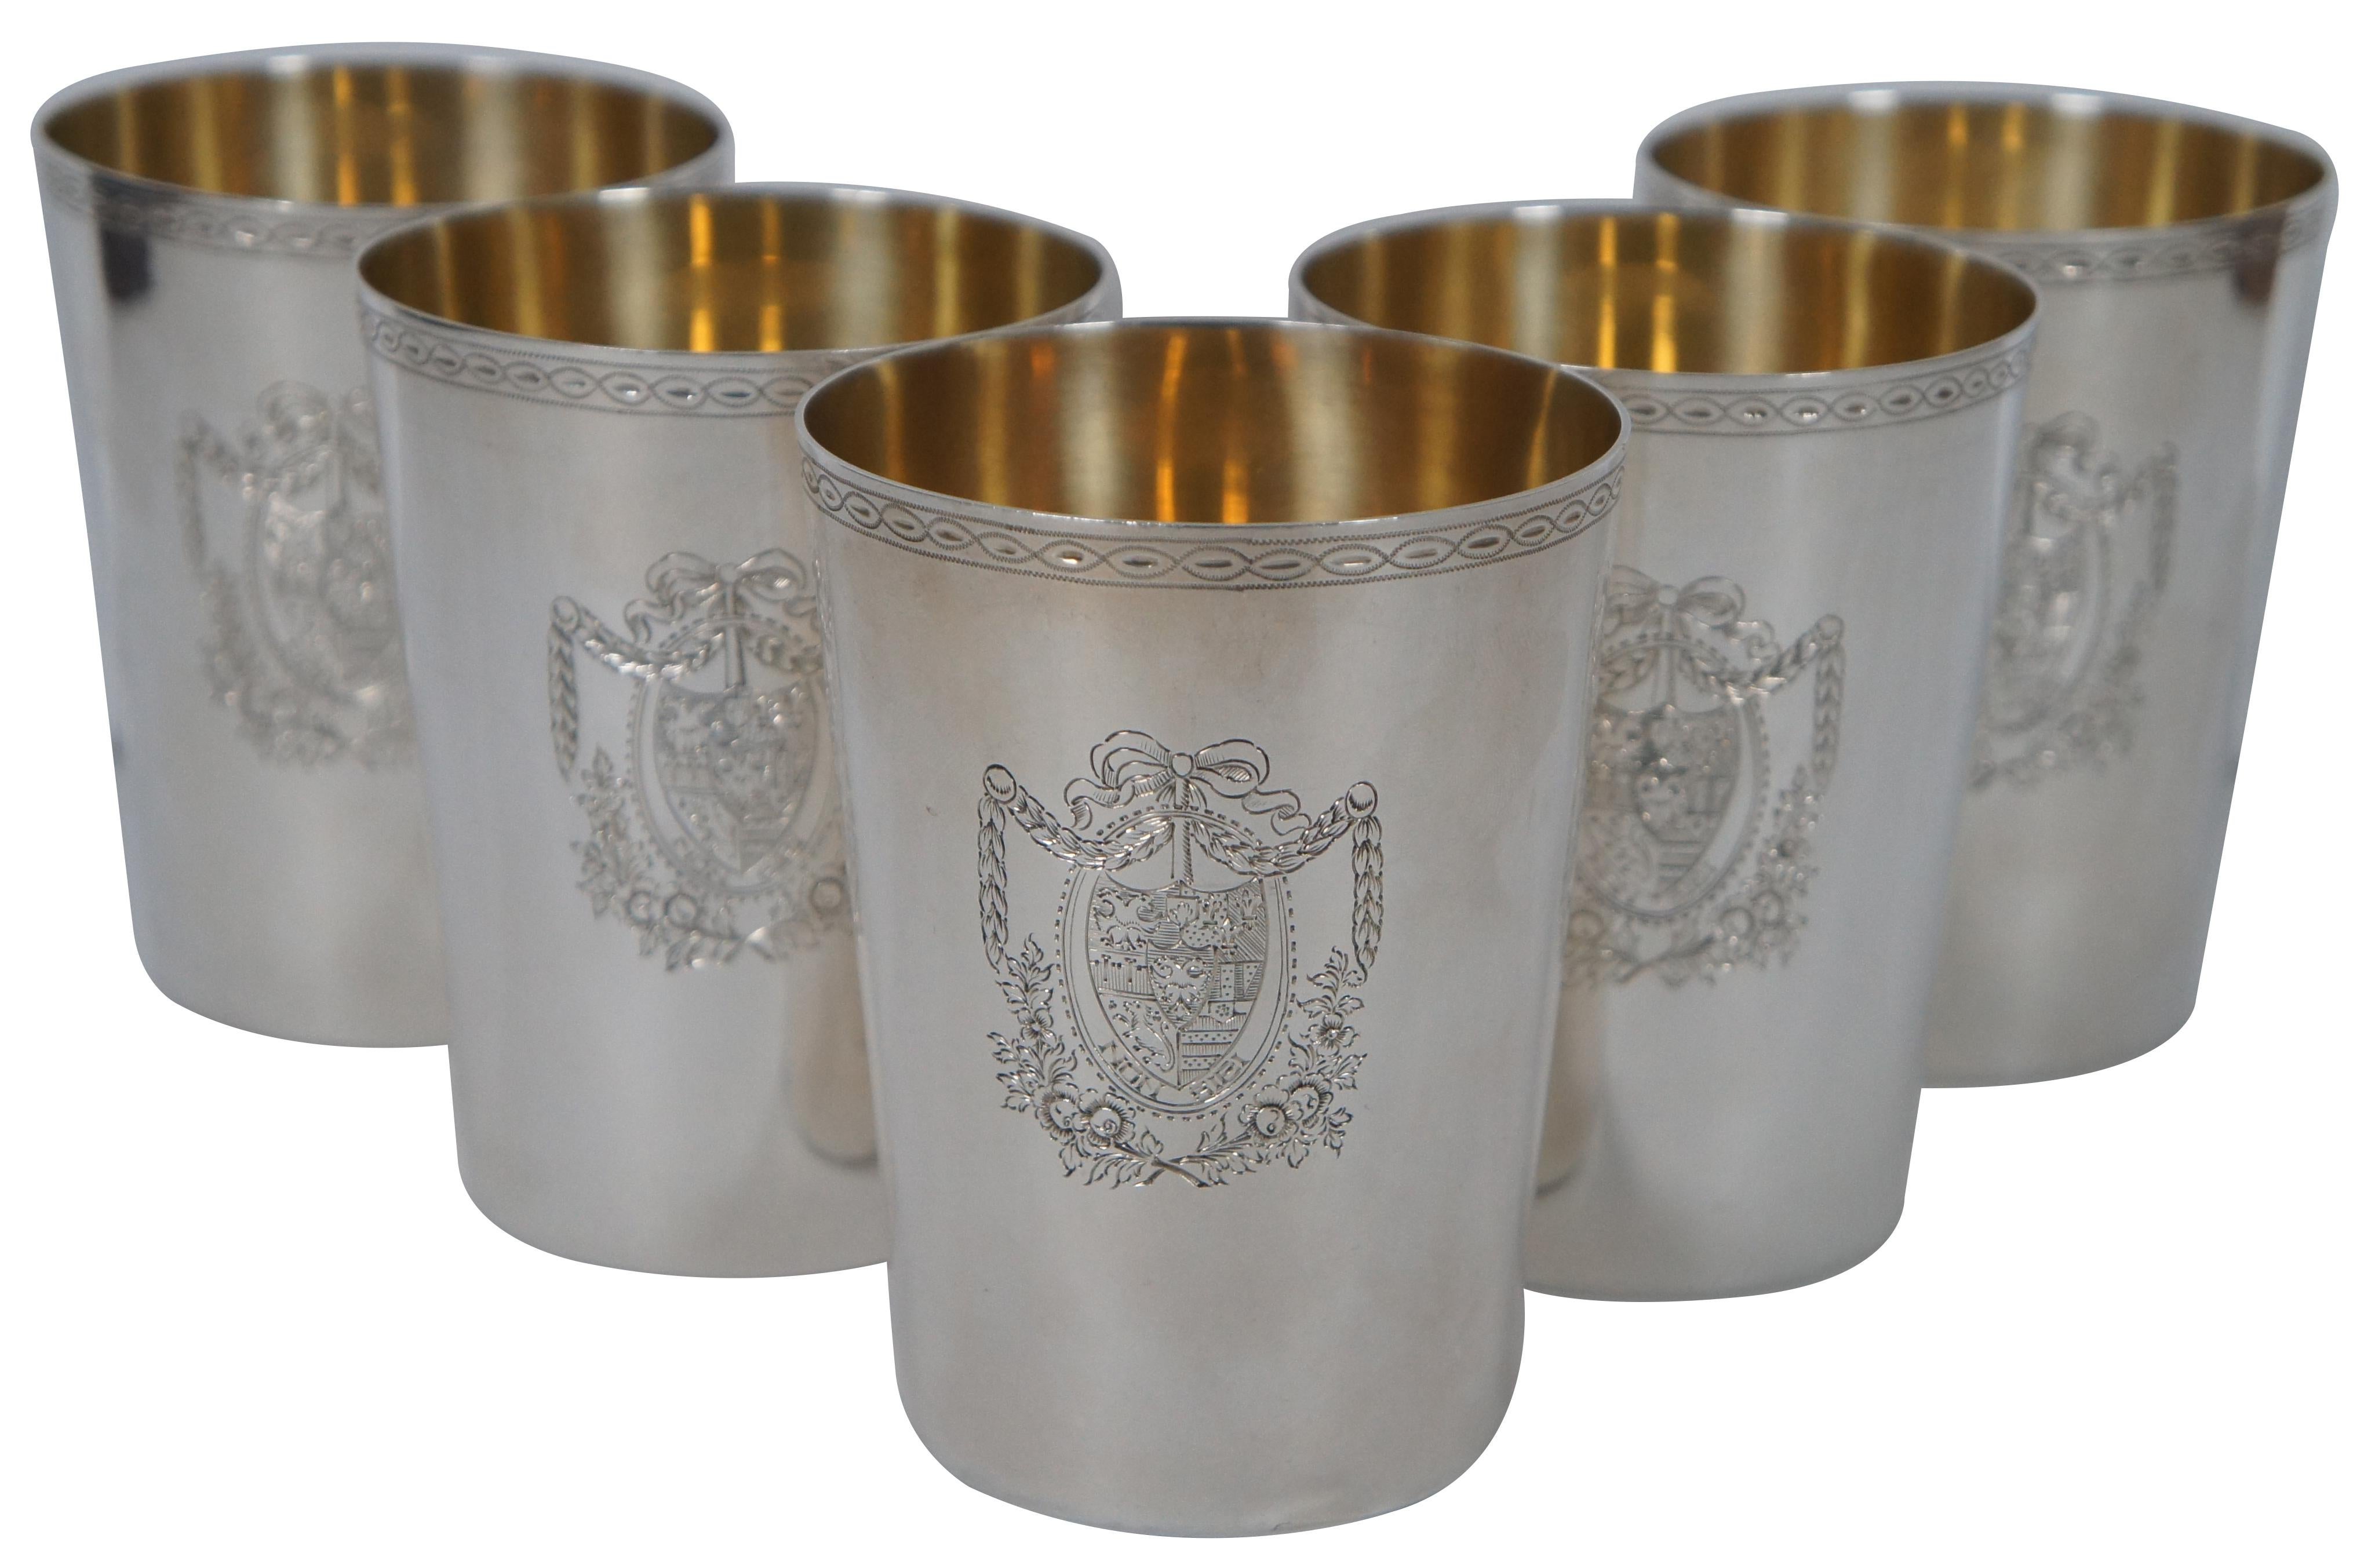 Set of five antique Georgian sterling silver .925 cups / tumblers featuring plated interiors, a decorative band around the top, and stamped with an intricate heraldic coat of arms with the motto “Non Sibi” (Latin: Not for Self). Marked on base with